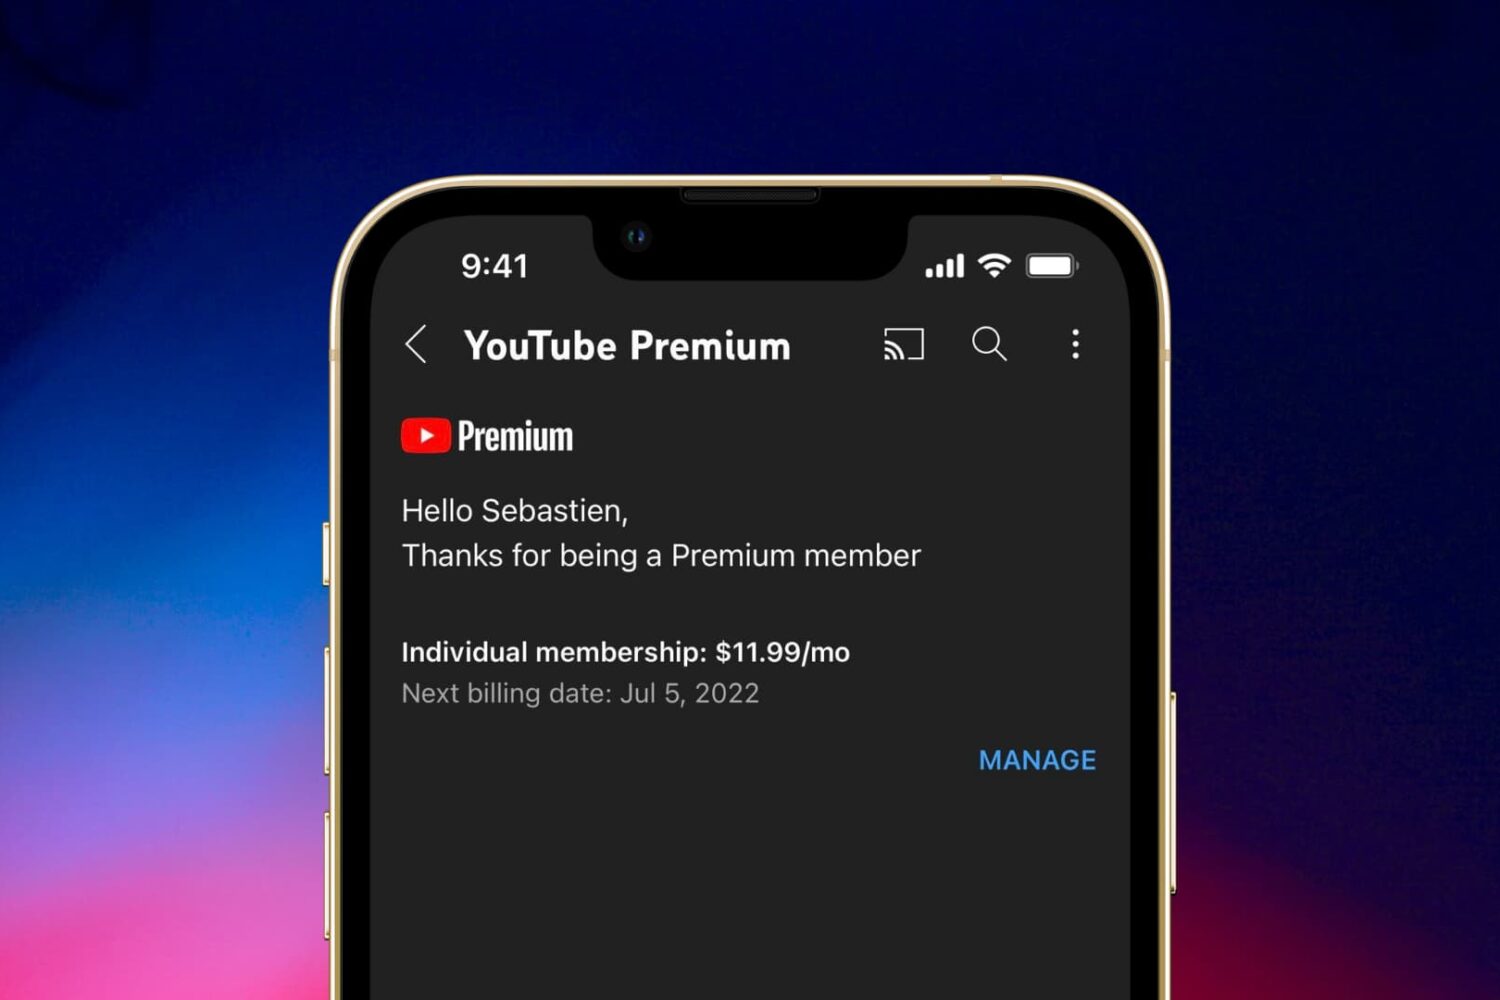 An iPhone showing the manage screen for YouTube Premium membership